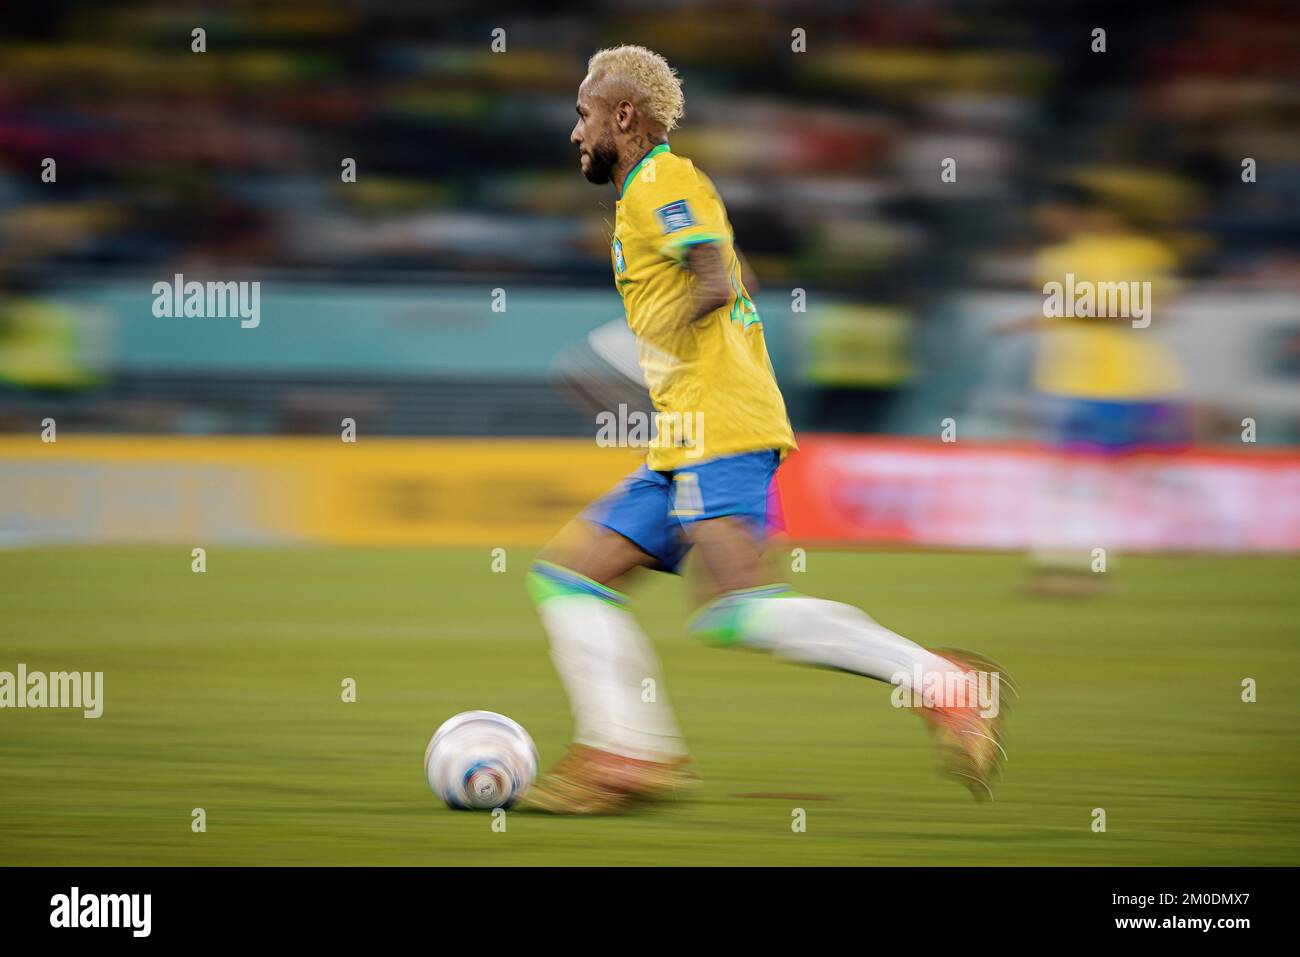 Doha, Catar. 05th Dec, 2022. Neymar Jr. do Brasil during a match between Brazil and South Korea, valid for the round of 16 of the World Cup, held at Estádio Estádio 974 in Doha, Qatar. Credit: Marcelo Machado de Melo/FotoArena/Alamy Live News Stock Photo